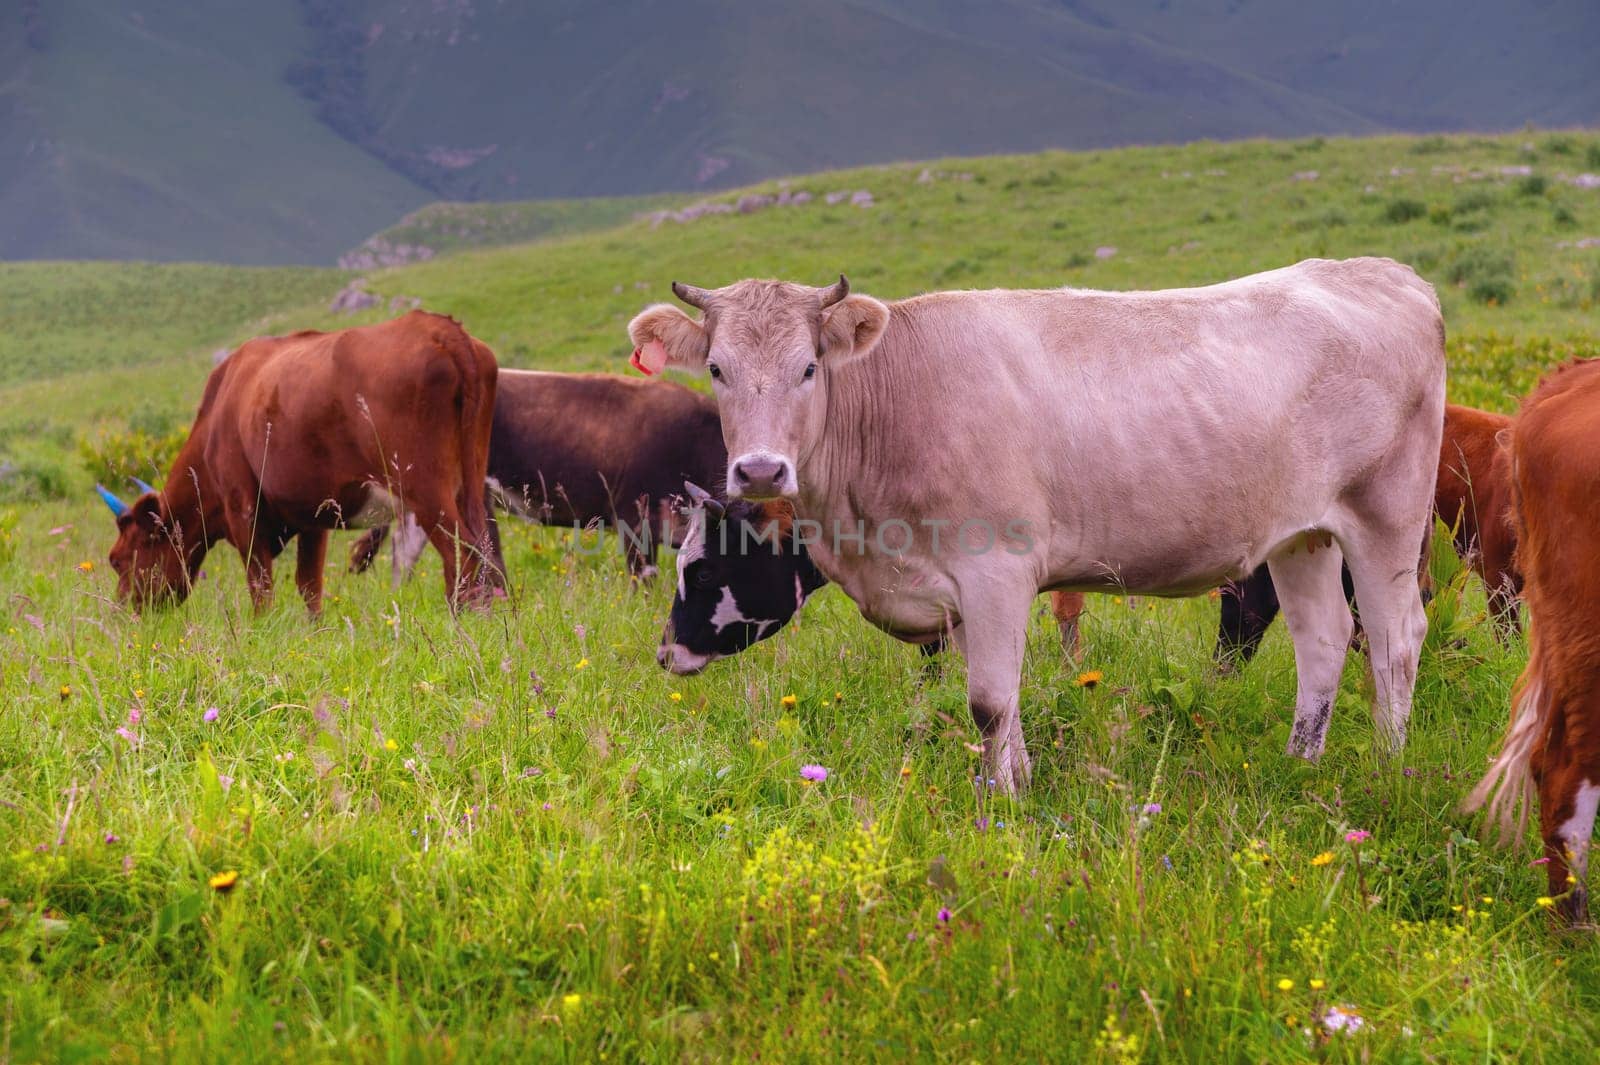 Cows graze on farmland. A herd of cows on a summer green field, one of the cows looks at the camera.